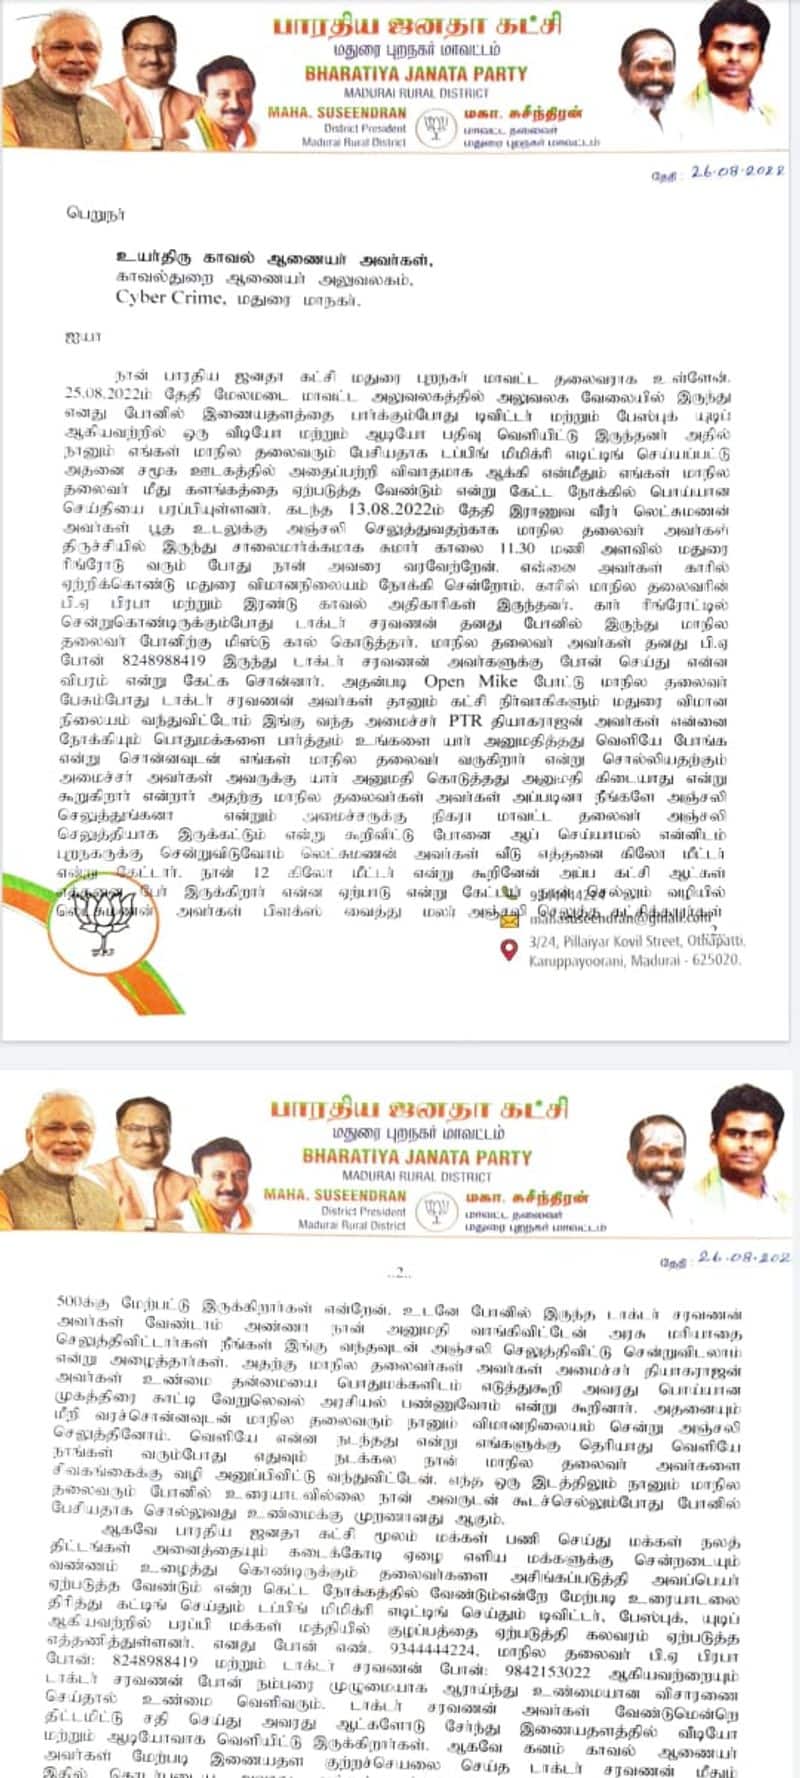 BJP has lodged a complaint with the Cybercrime office in Madurai demanding action against those who published the fake audio